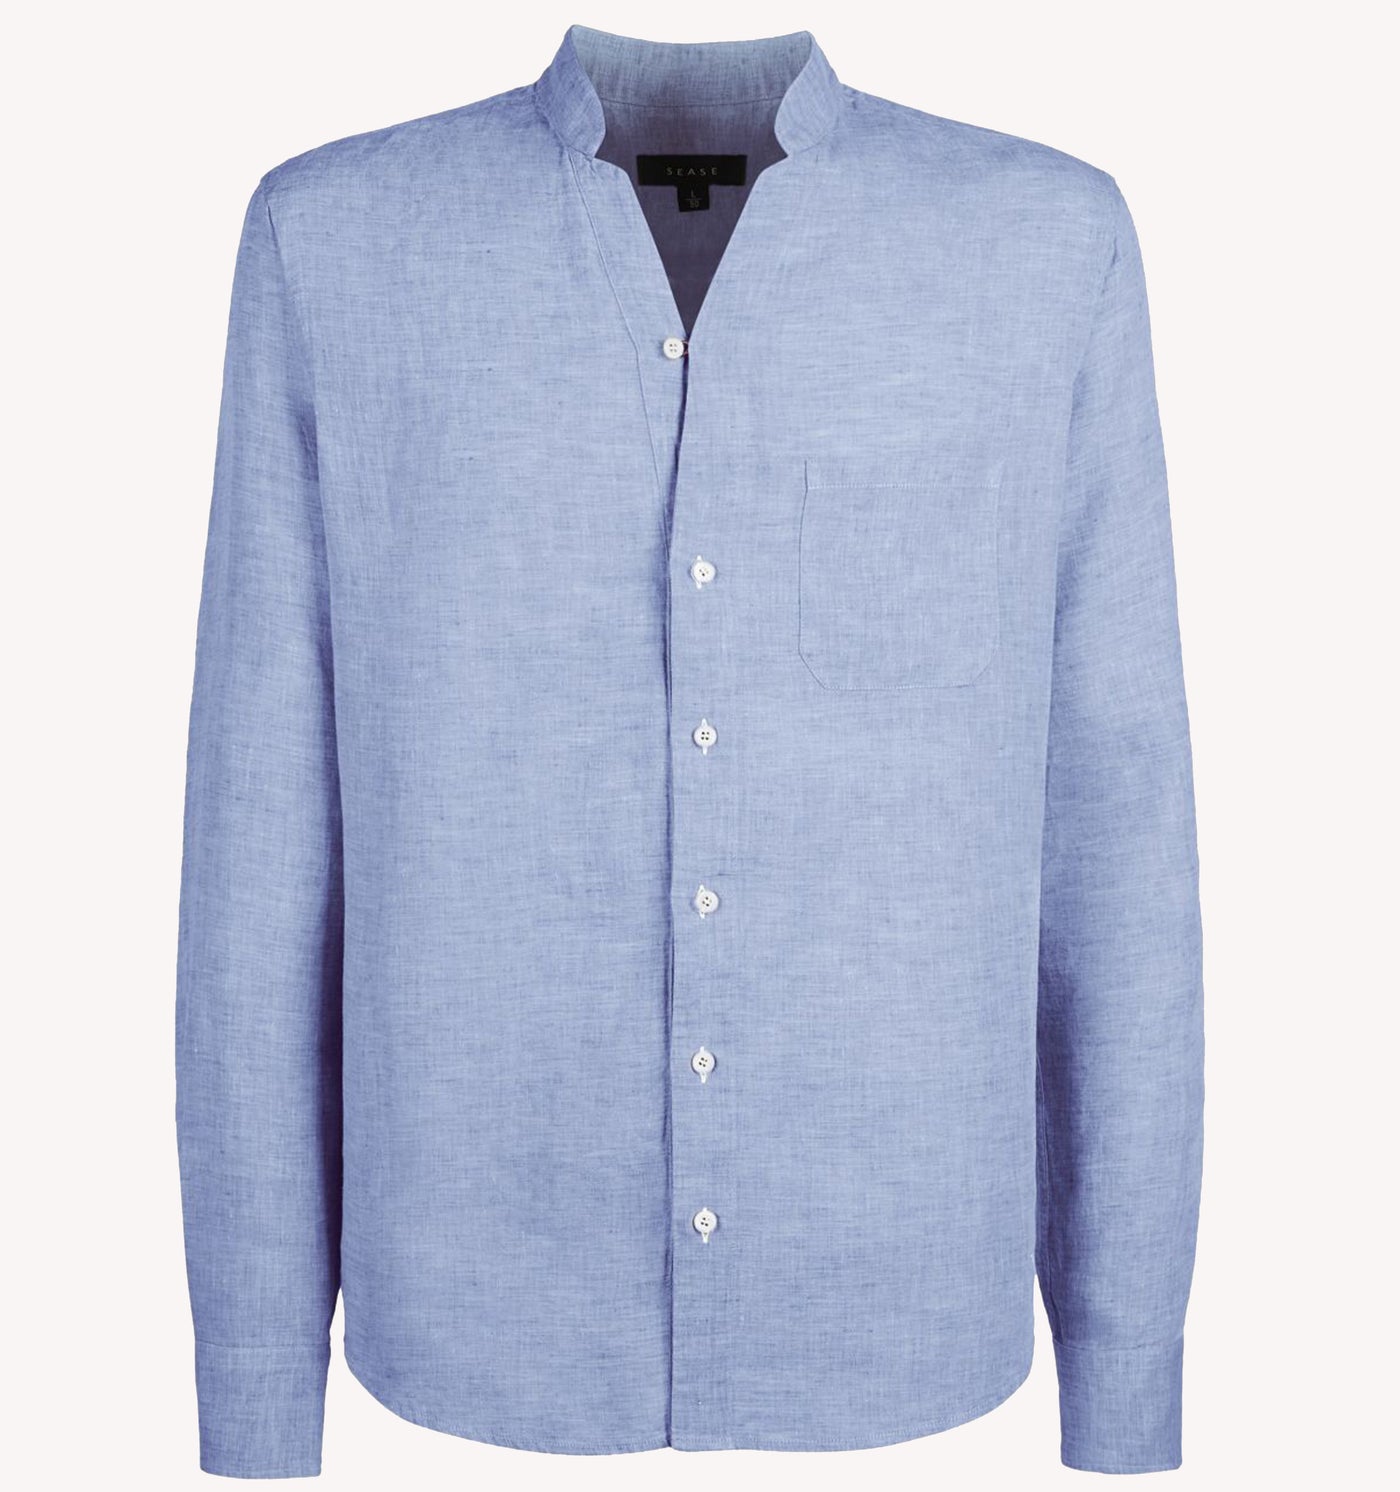 Sease Fish Tail Sport Shirt in Sky Blue